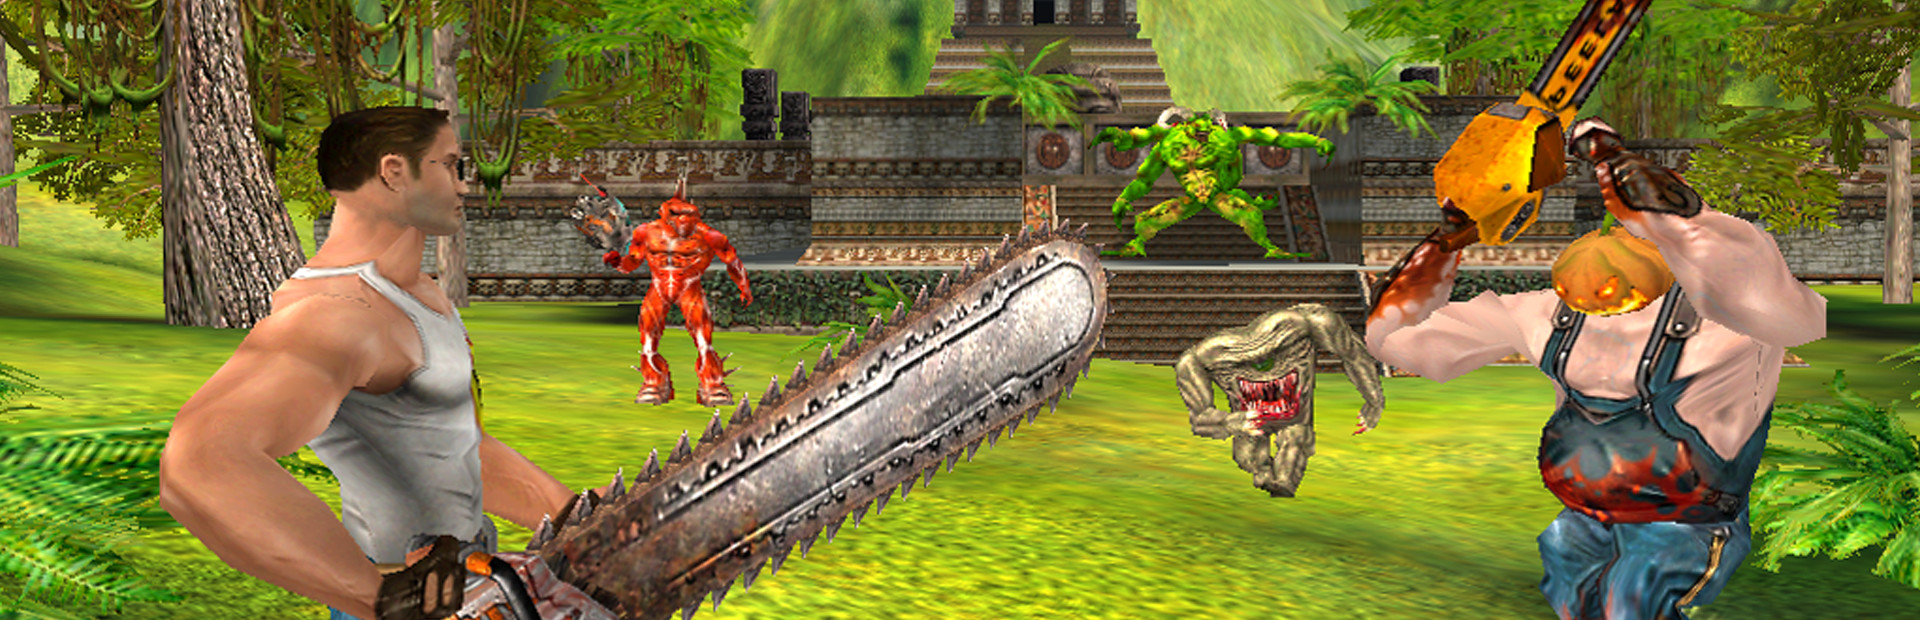 Serious Sam Classic: The Second Encounter cover image